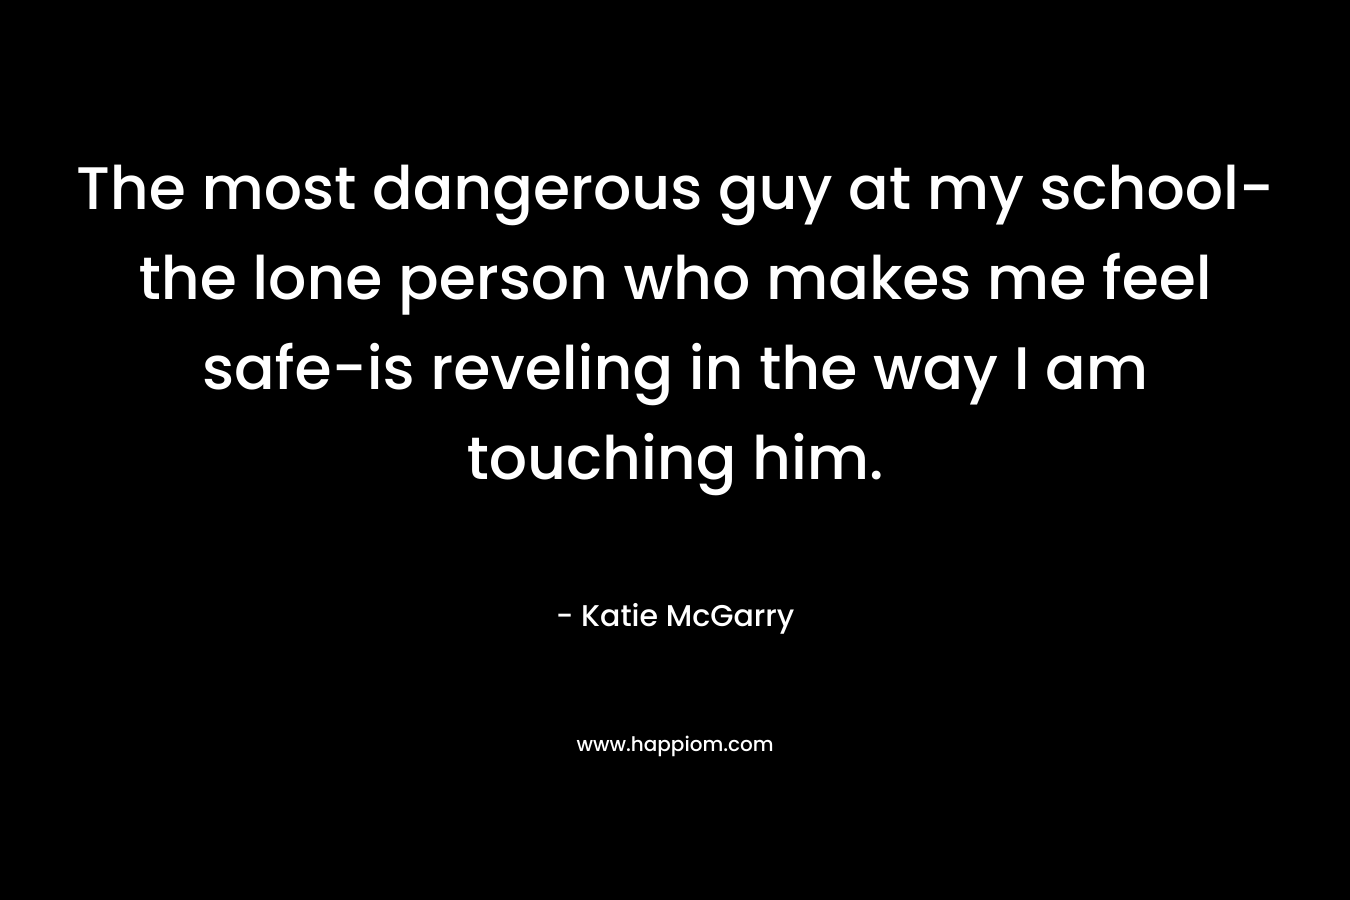 The most dangerous guy at my school-the lone person who makes me feel safe-is reveling in the way I am touching him. – Katie McGarry